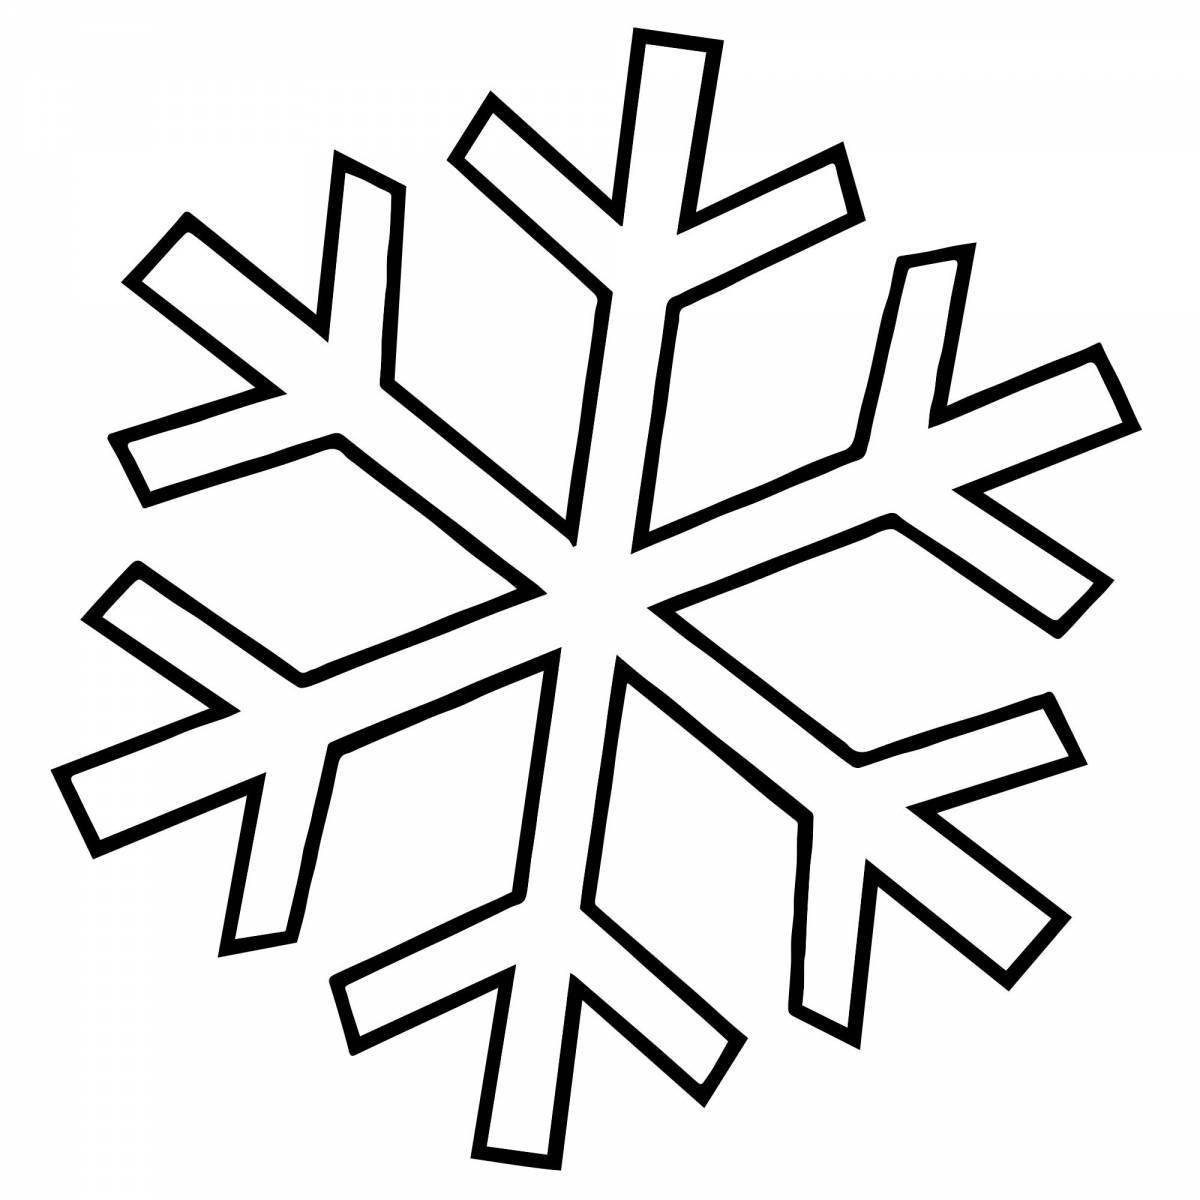 Awesome snowflake coloring pages